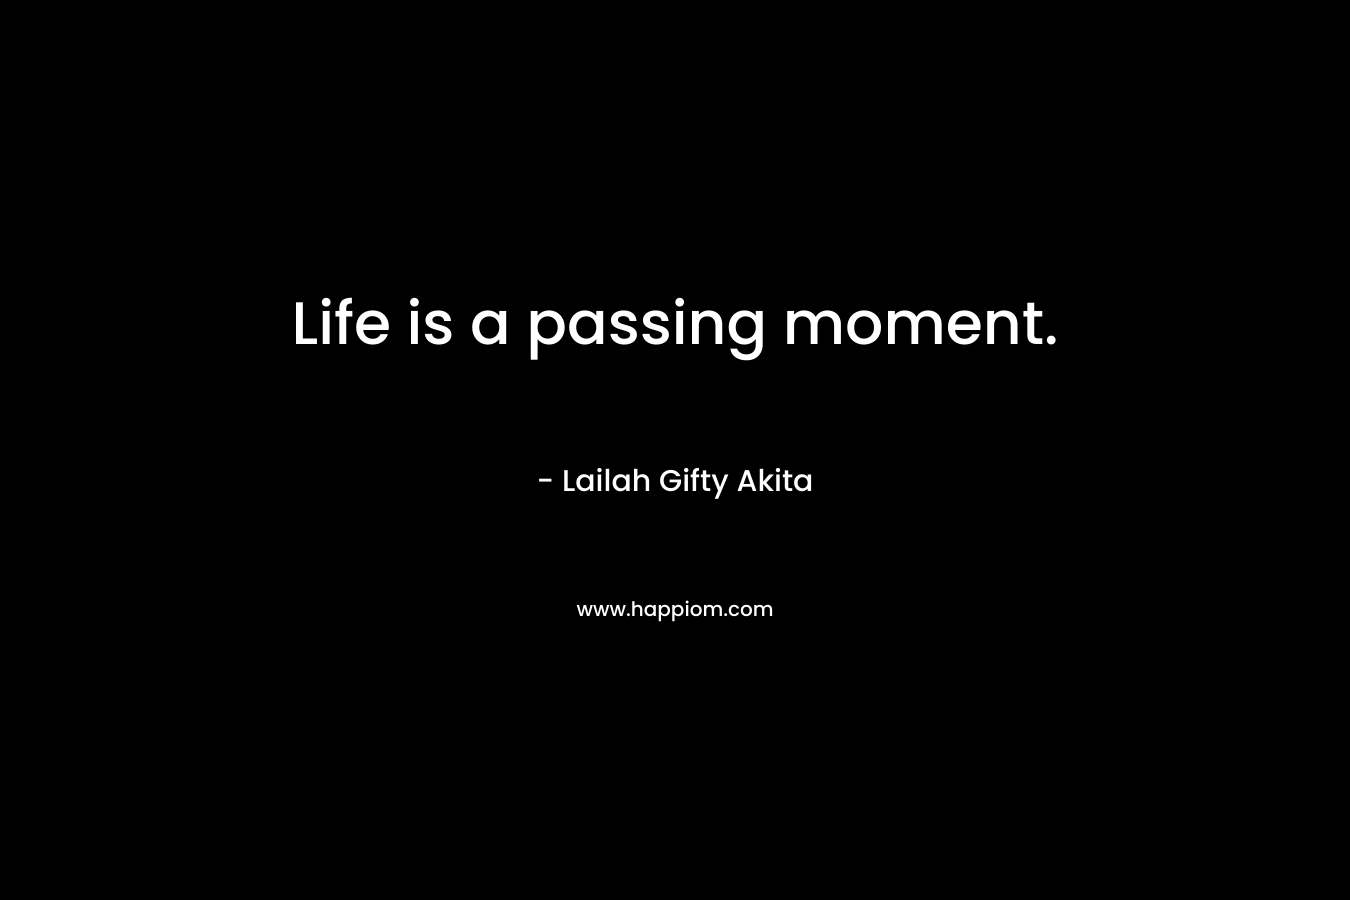 Life is a passing moment.